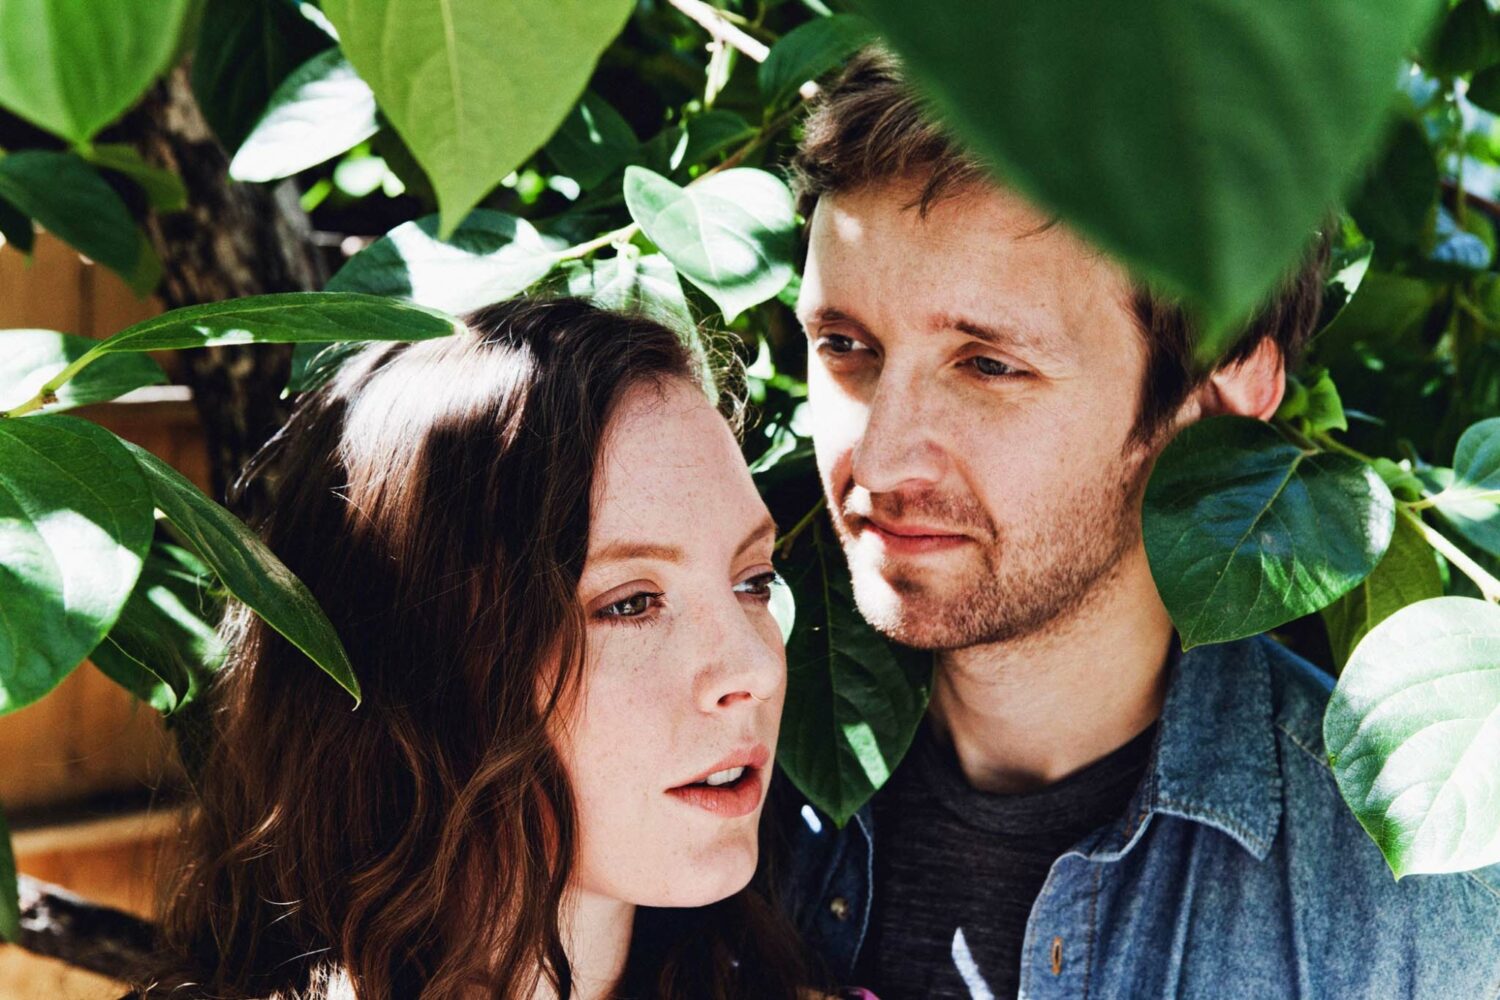 Sylvan Esso: “You’ve got to switch it up and keep it interesting”